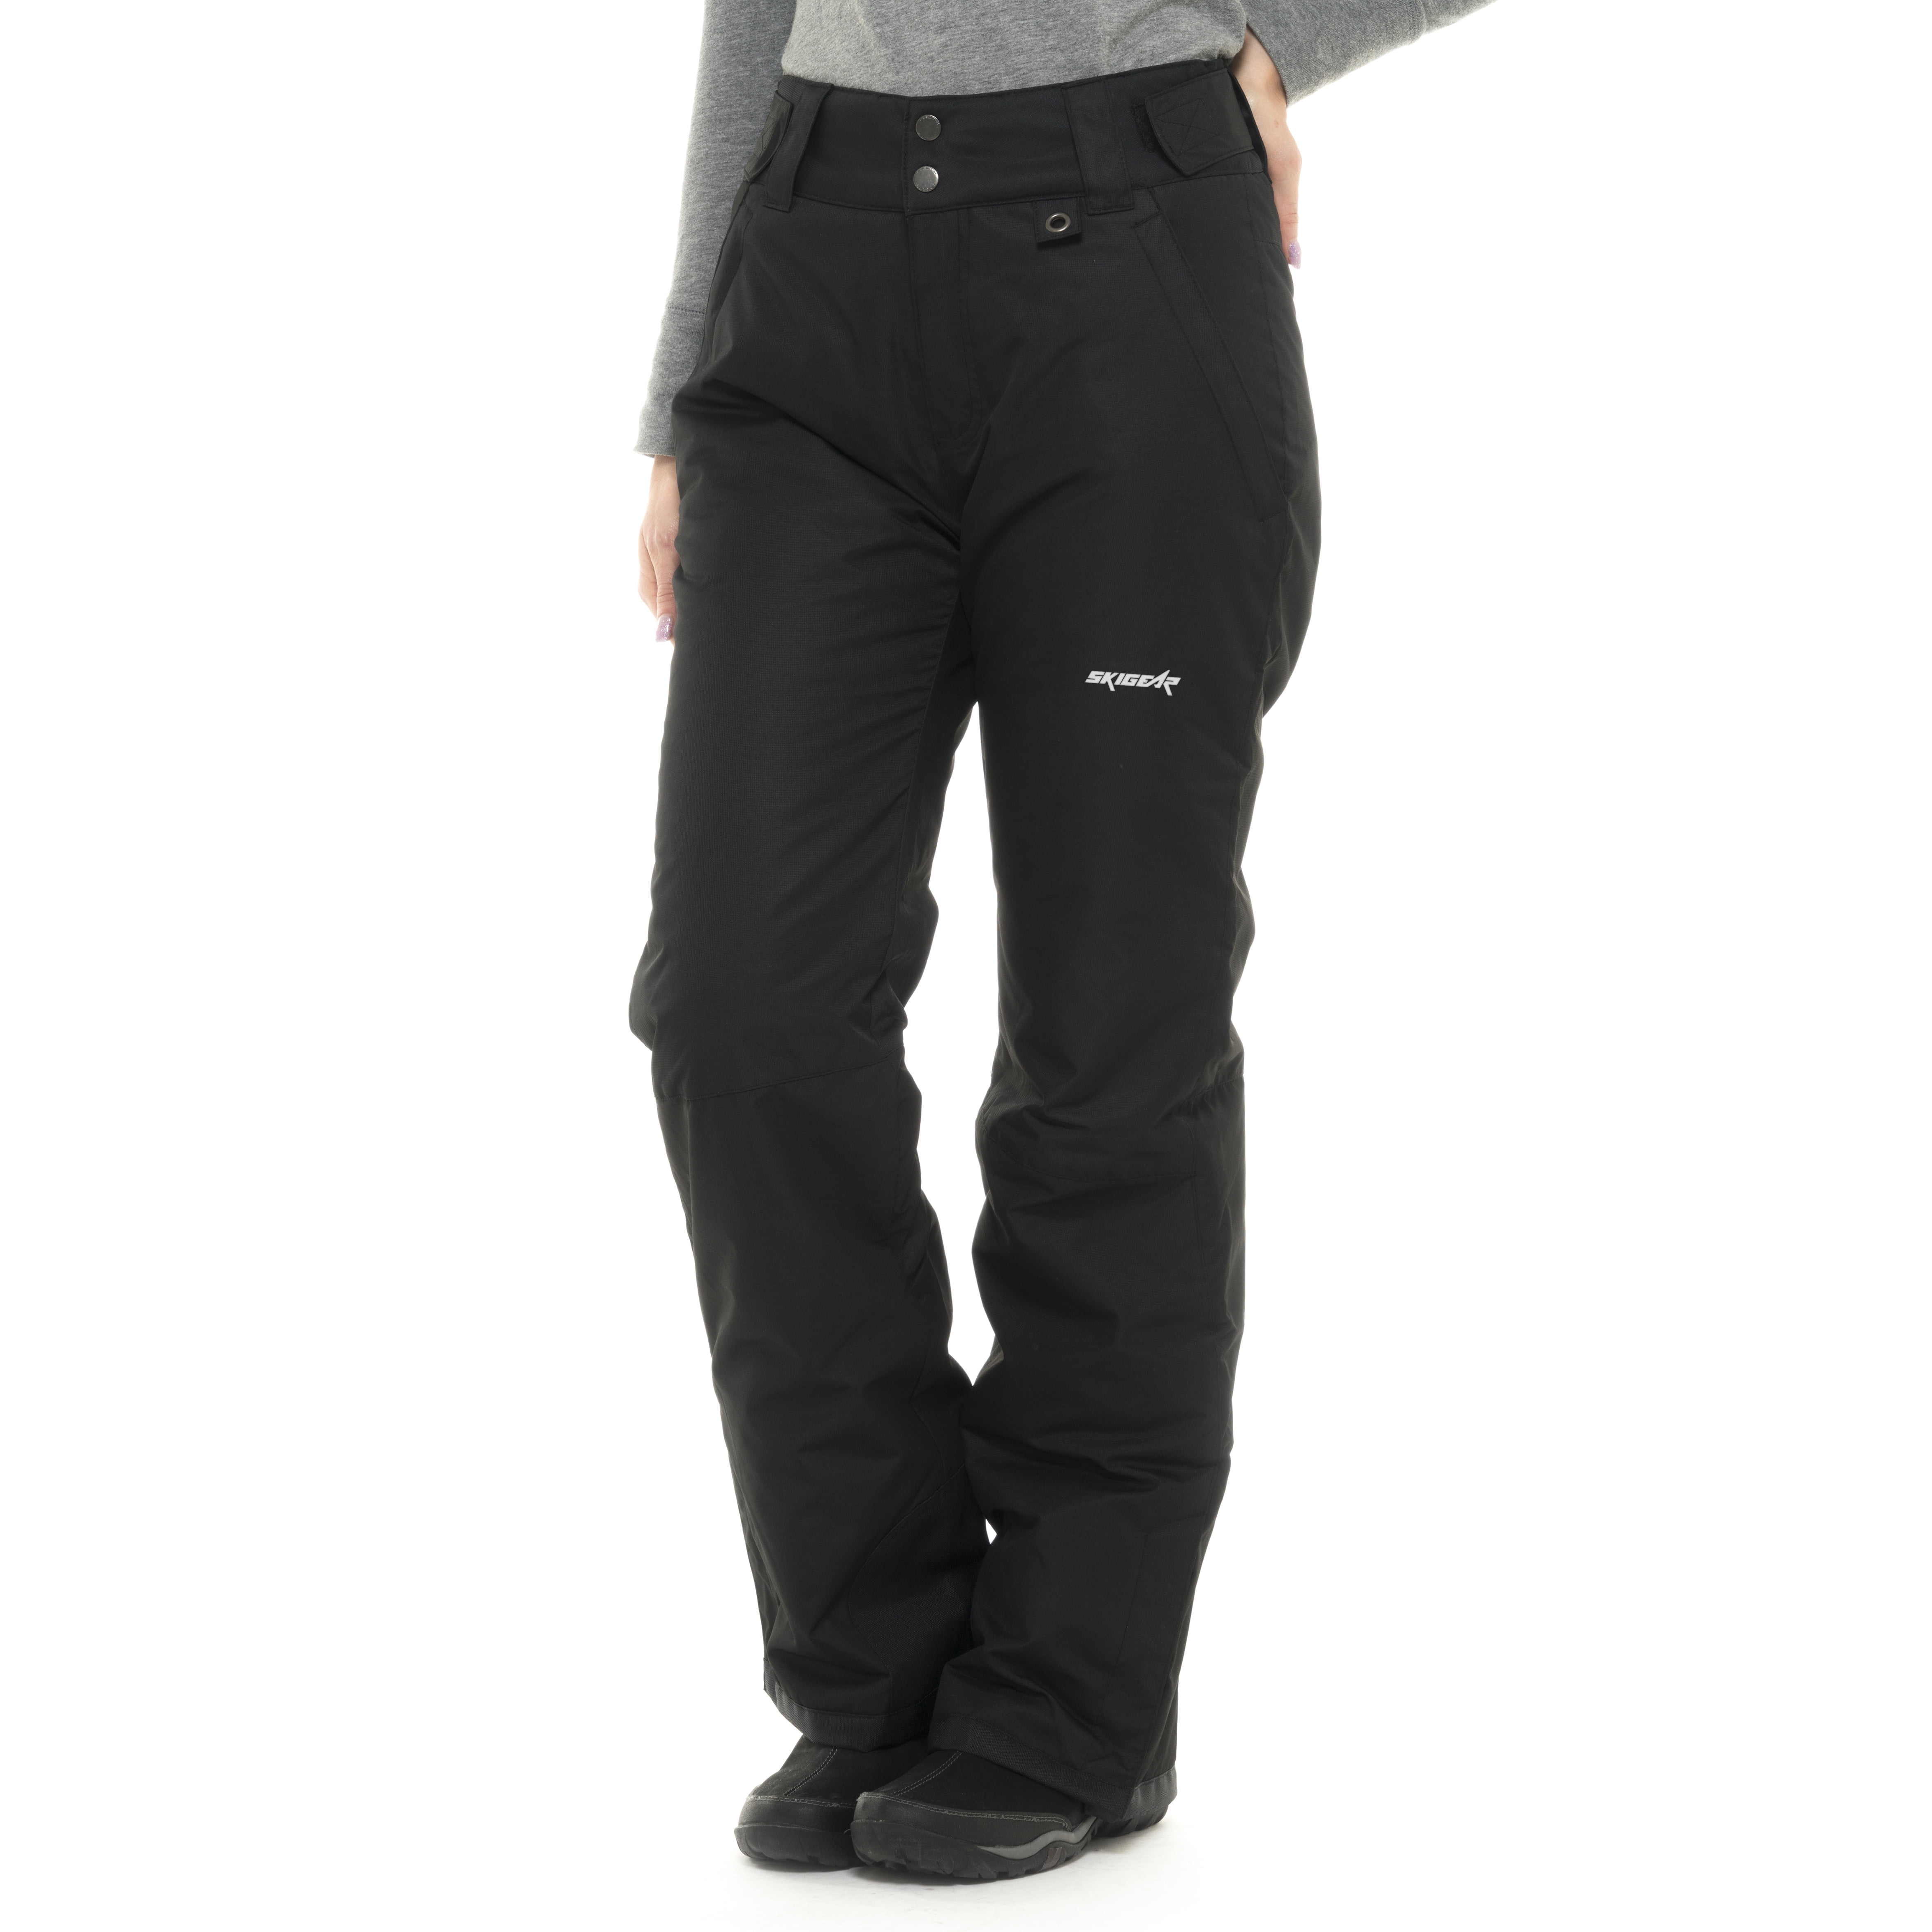 SkiGear by Arctix Women's and Plus Size Insulated Snow Pant